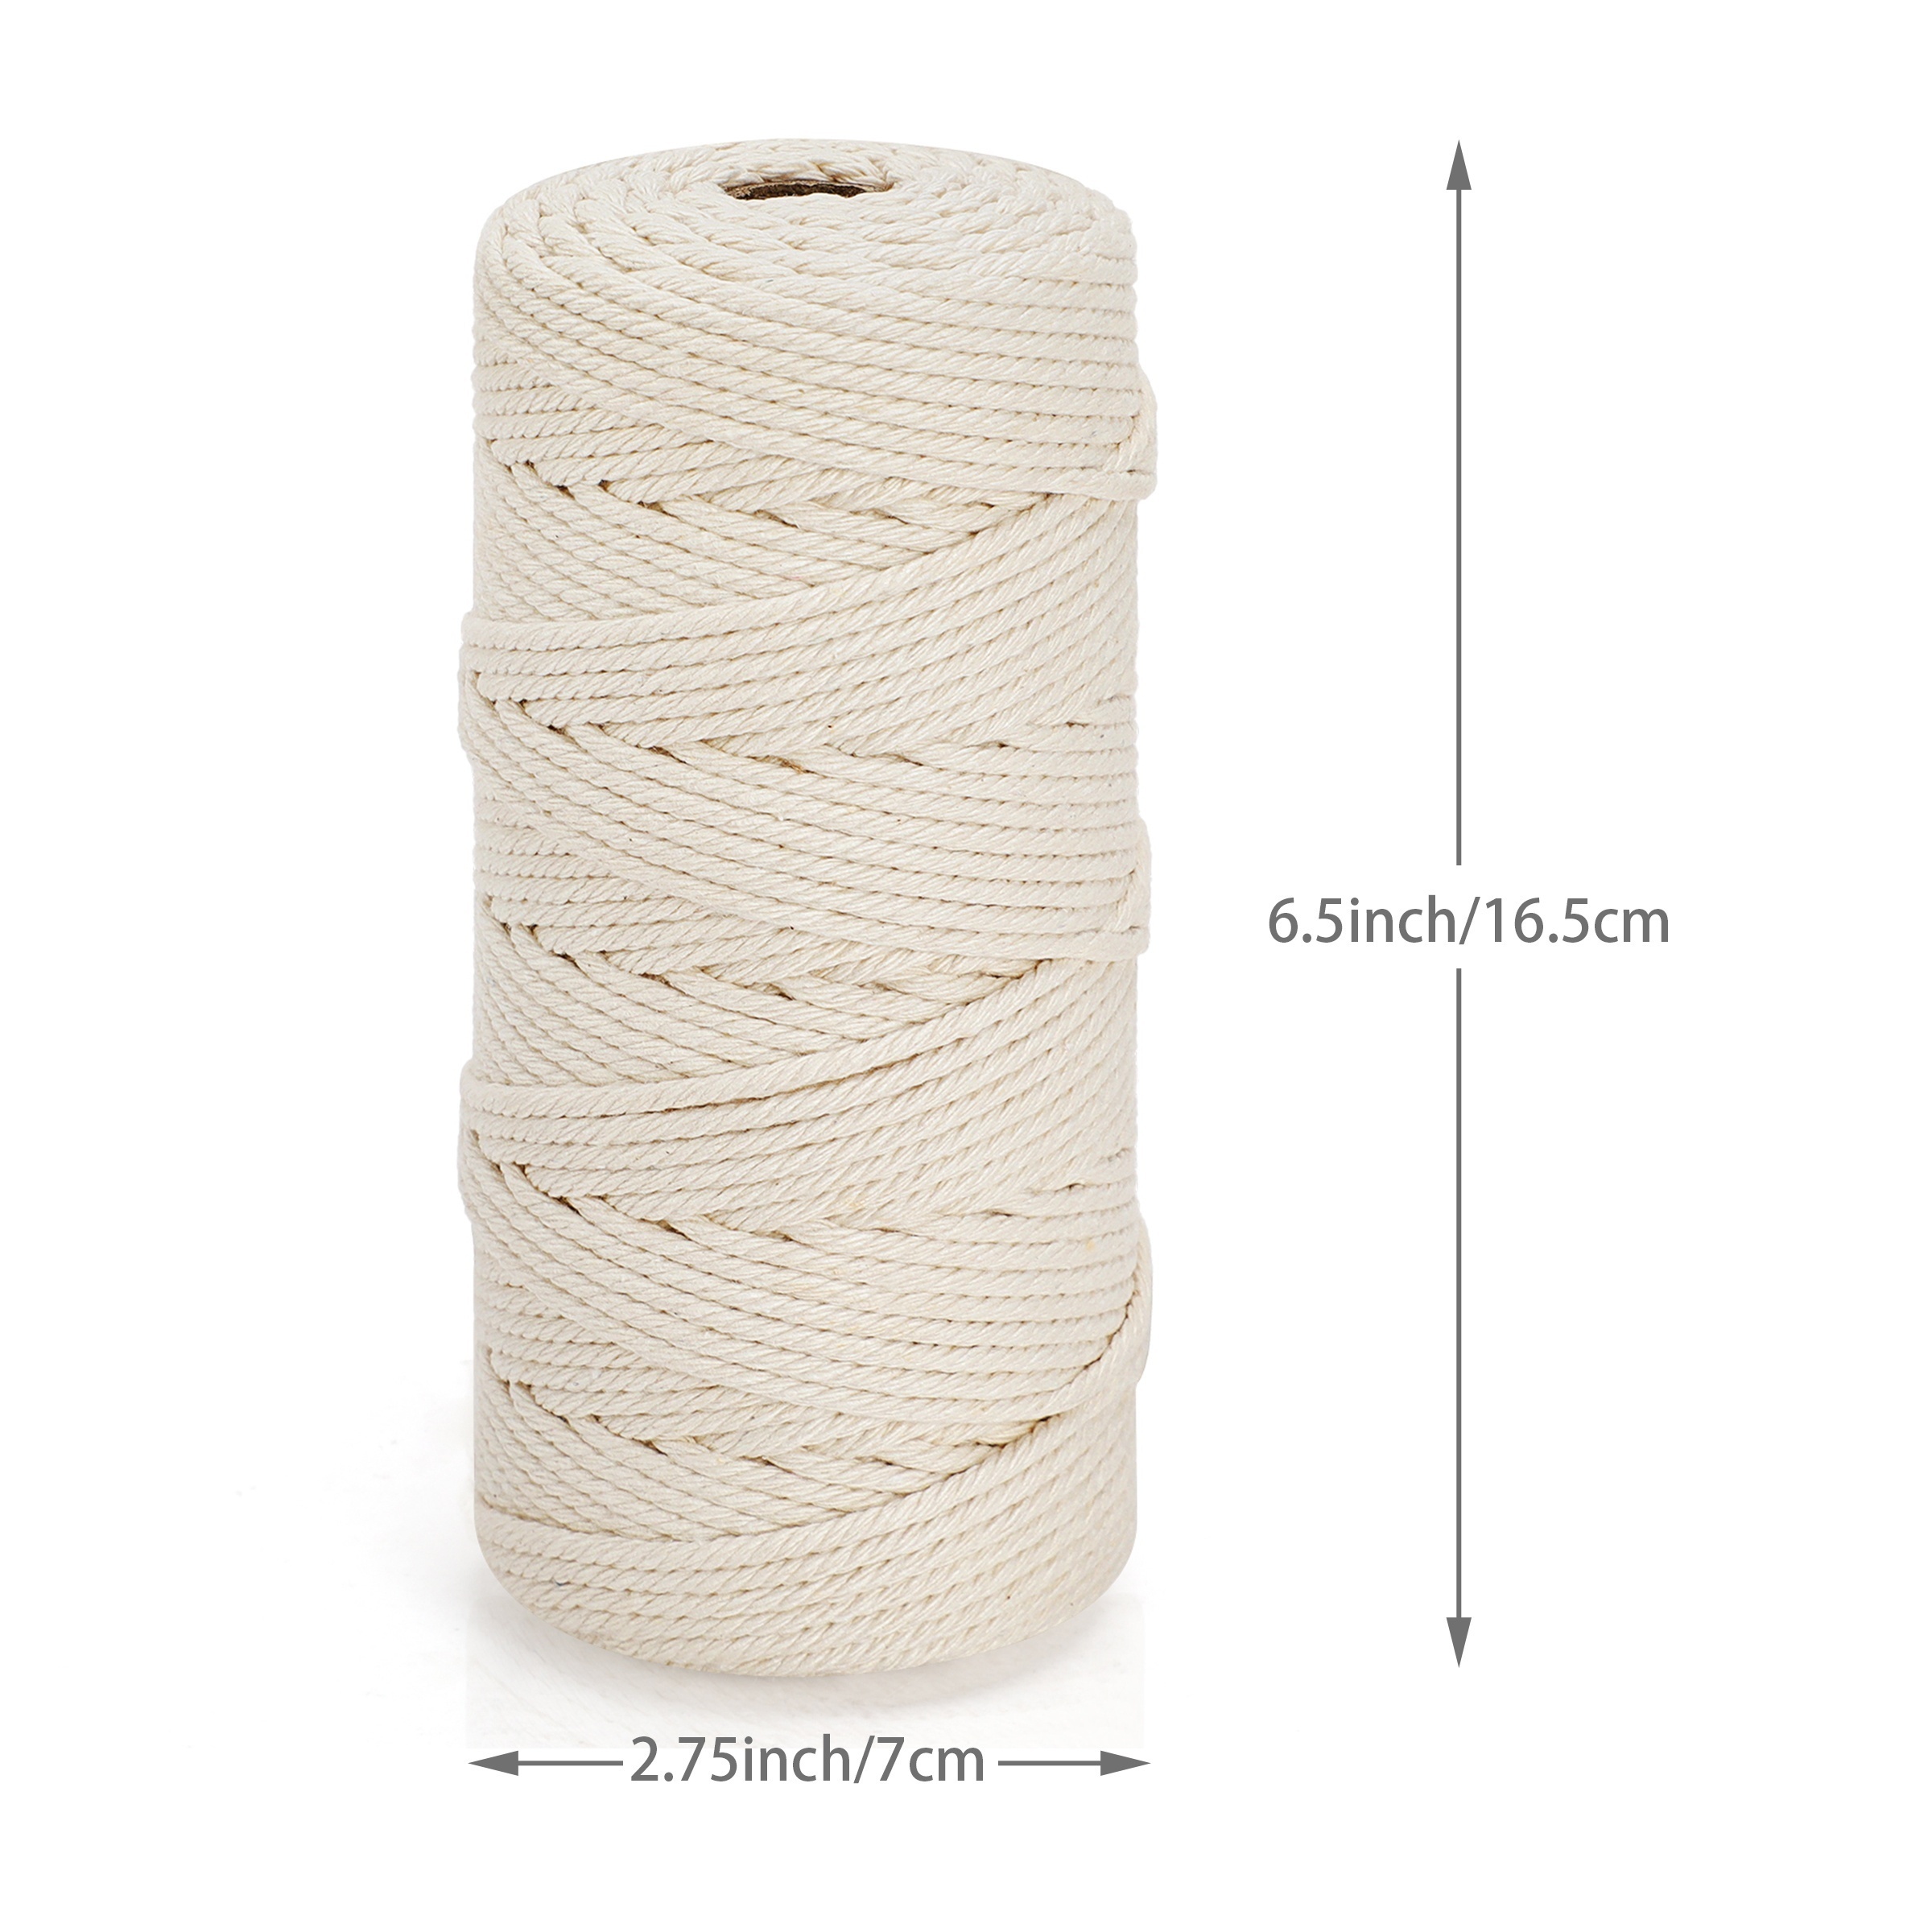 Christmas Macrame Cord 4mm x 328 Feet, Natural Cotton Macrame Cotton Rope ,  Decorative Cotton Craft Cord for Wall Hangings, Plant Hangers, Gift  Crafting and Wedding Decor (Beige) 